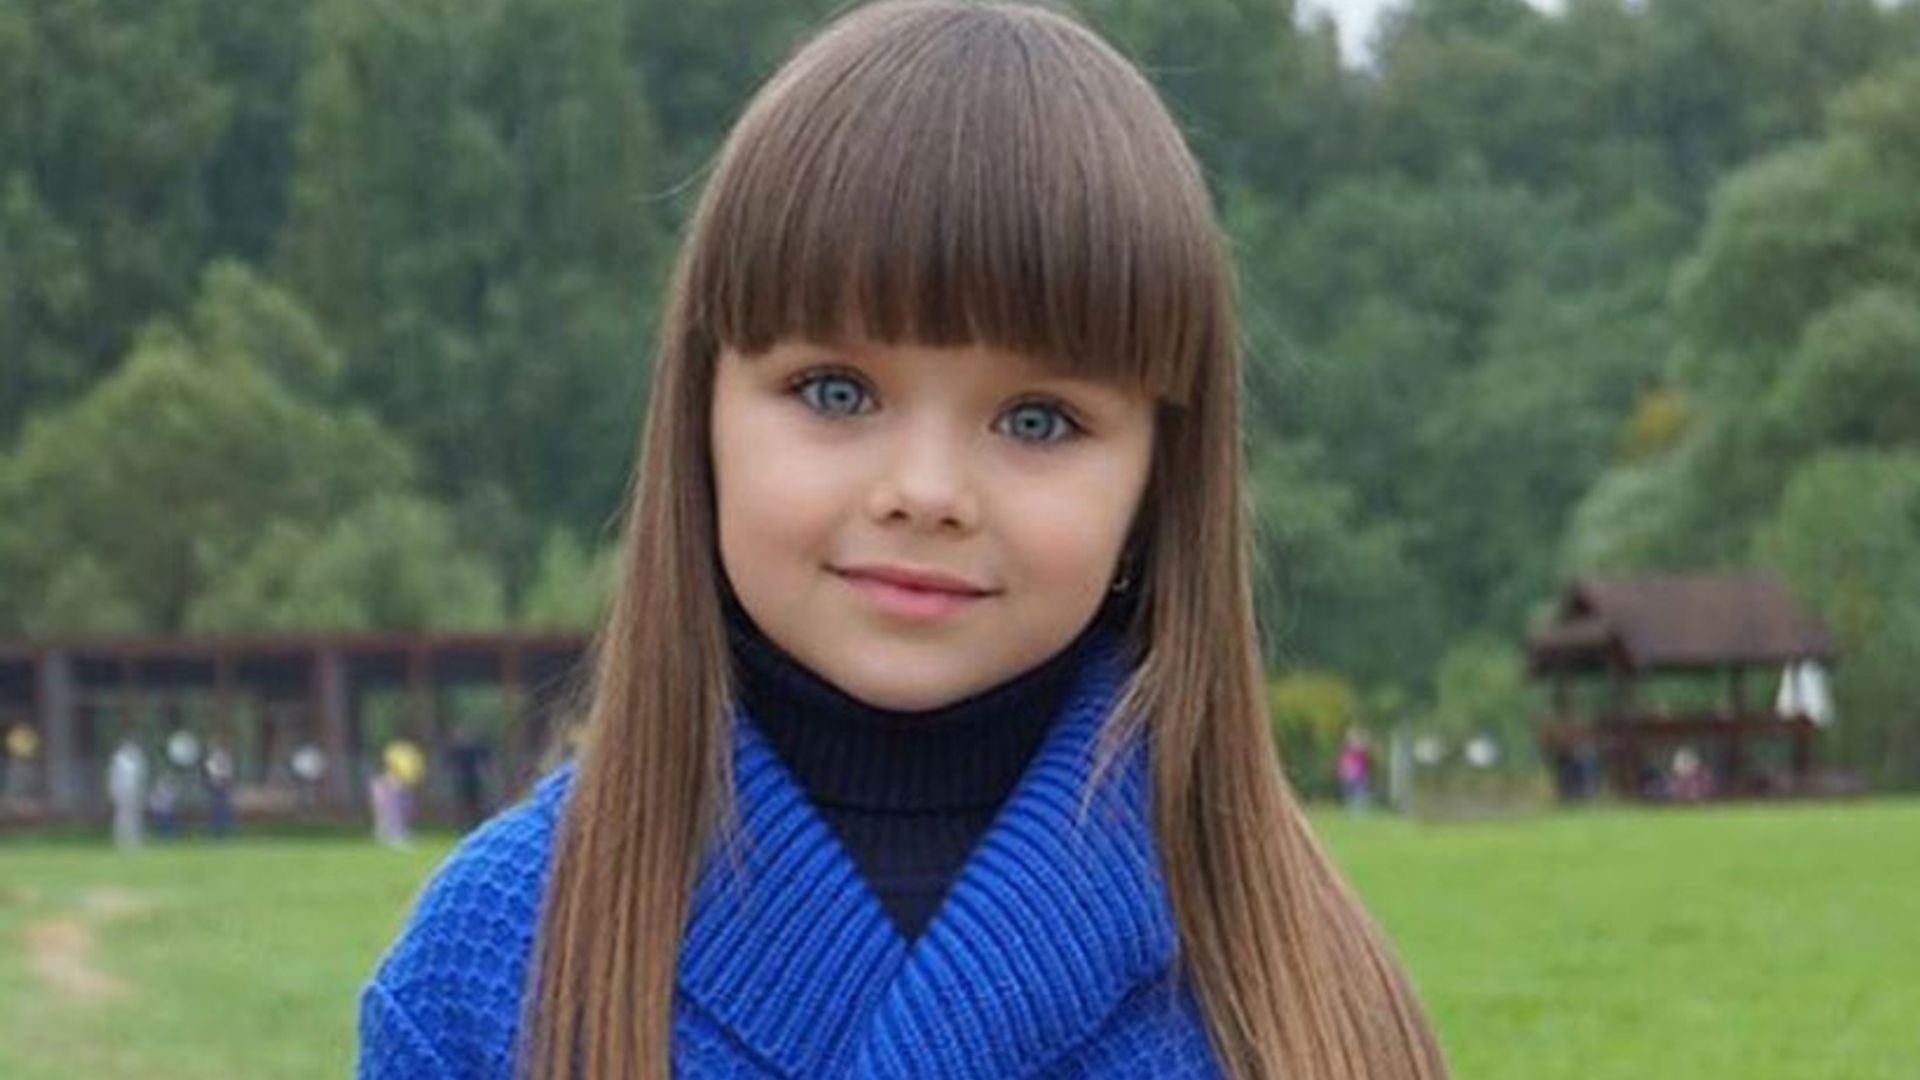 Get to know the six-year-old named the most beautiful girl in the world